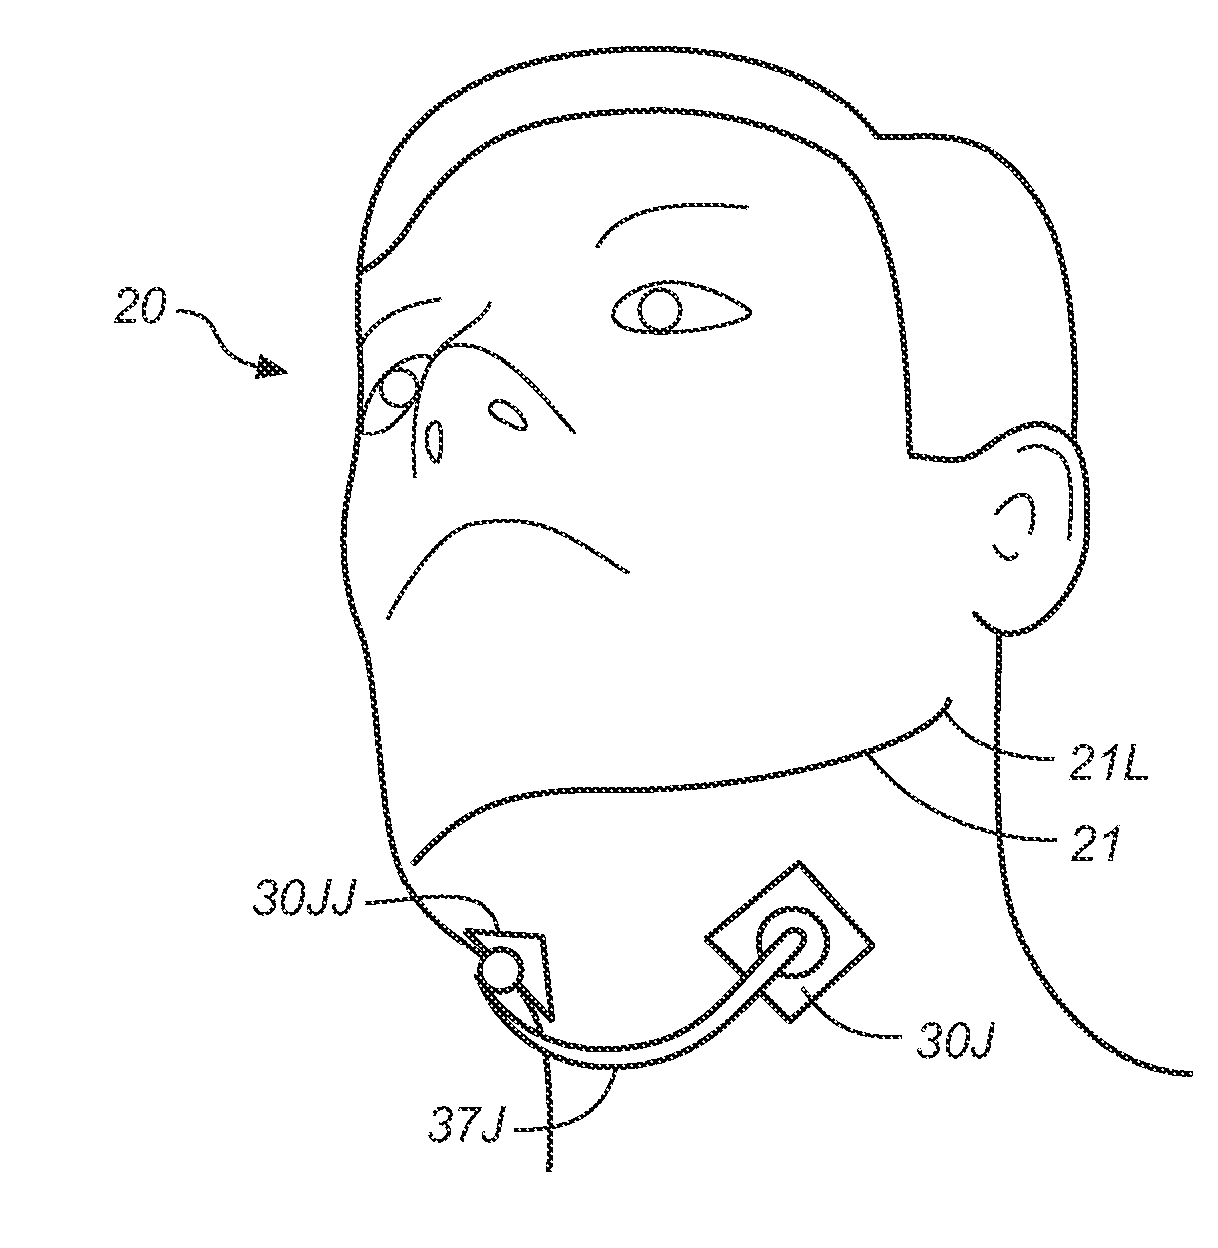 Method and apparatus for treatment of snoring and sleep apnea